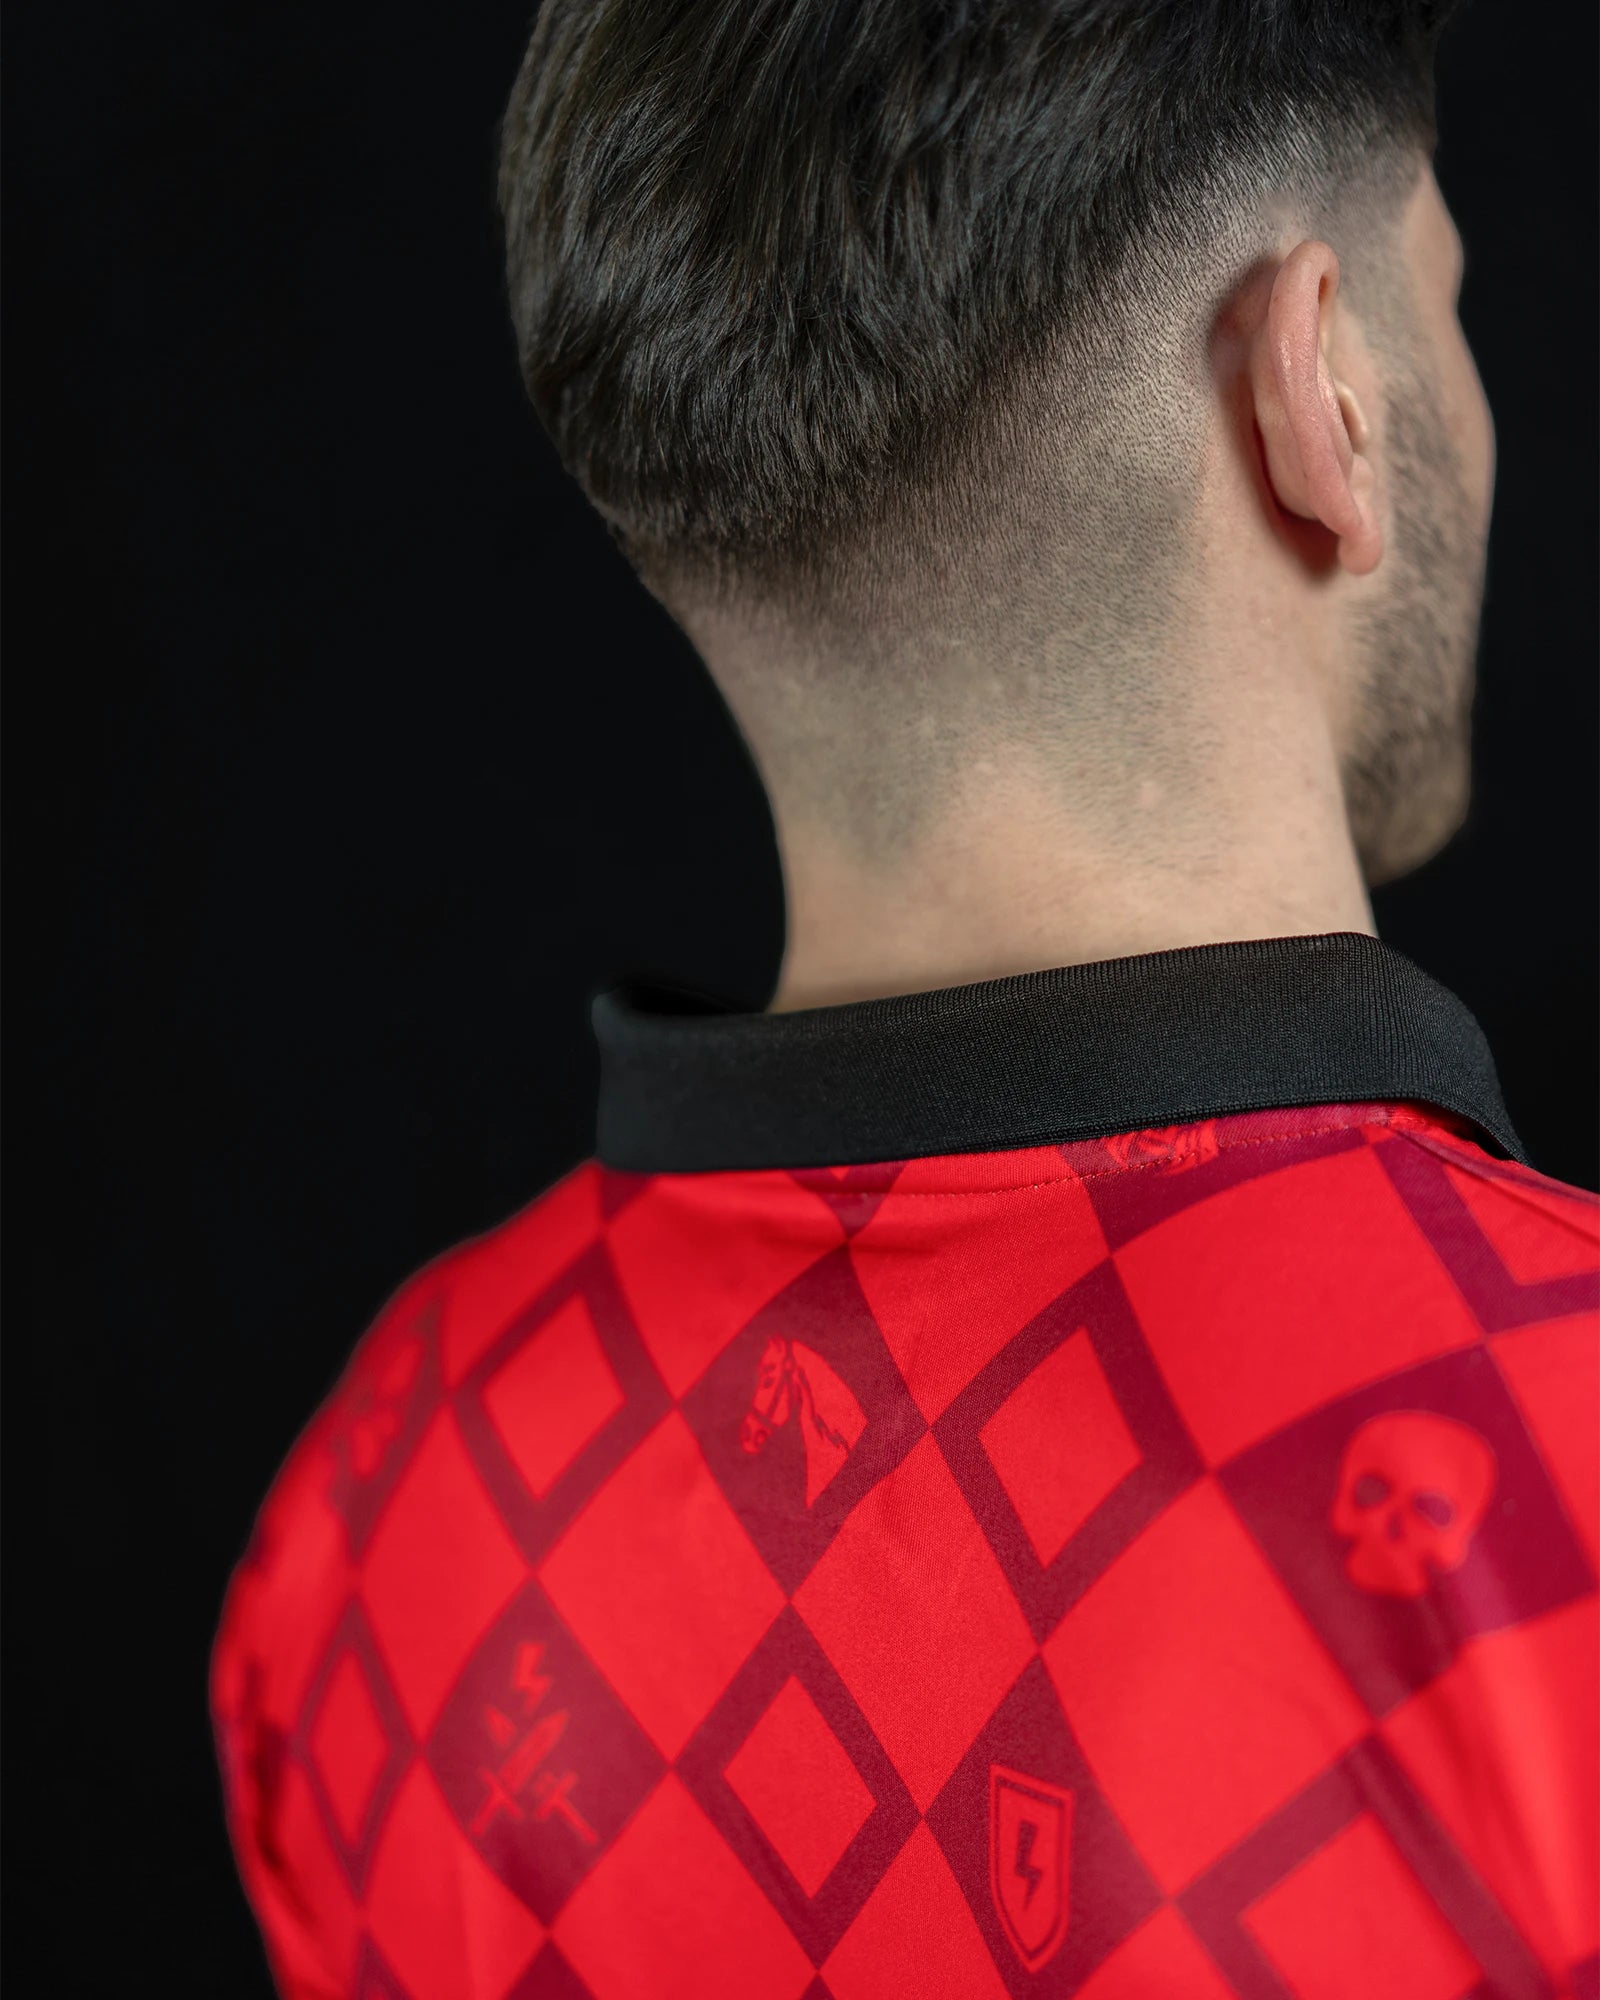 The Witcher Team Jersey Red